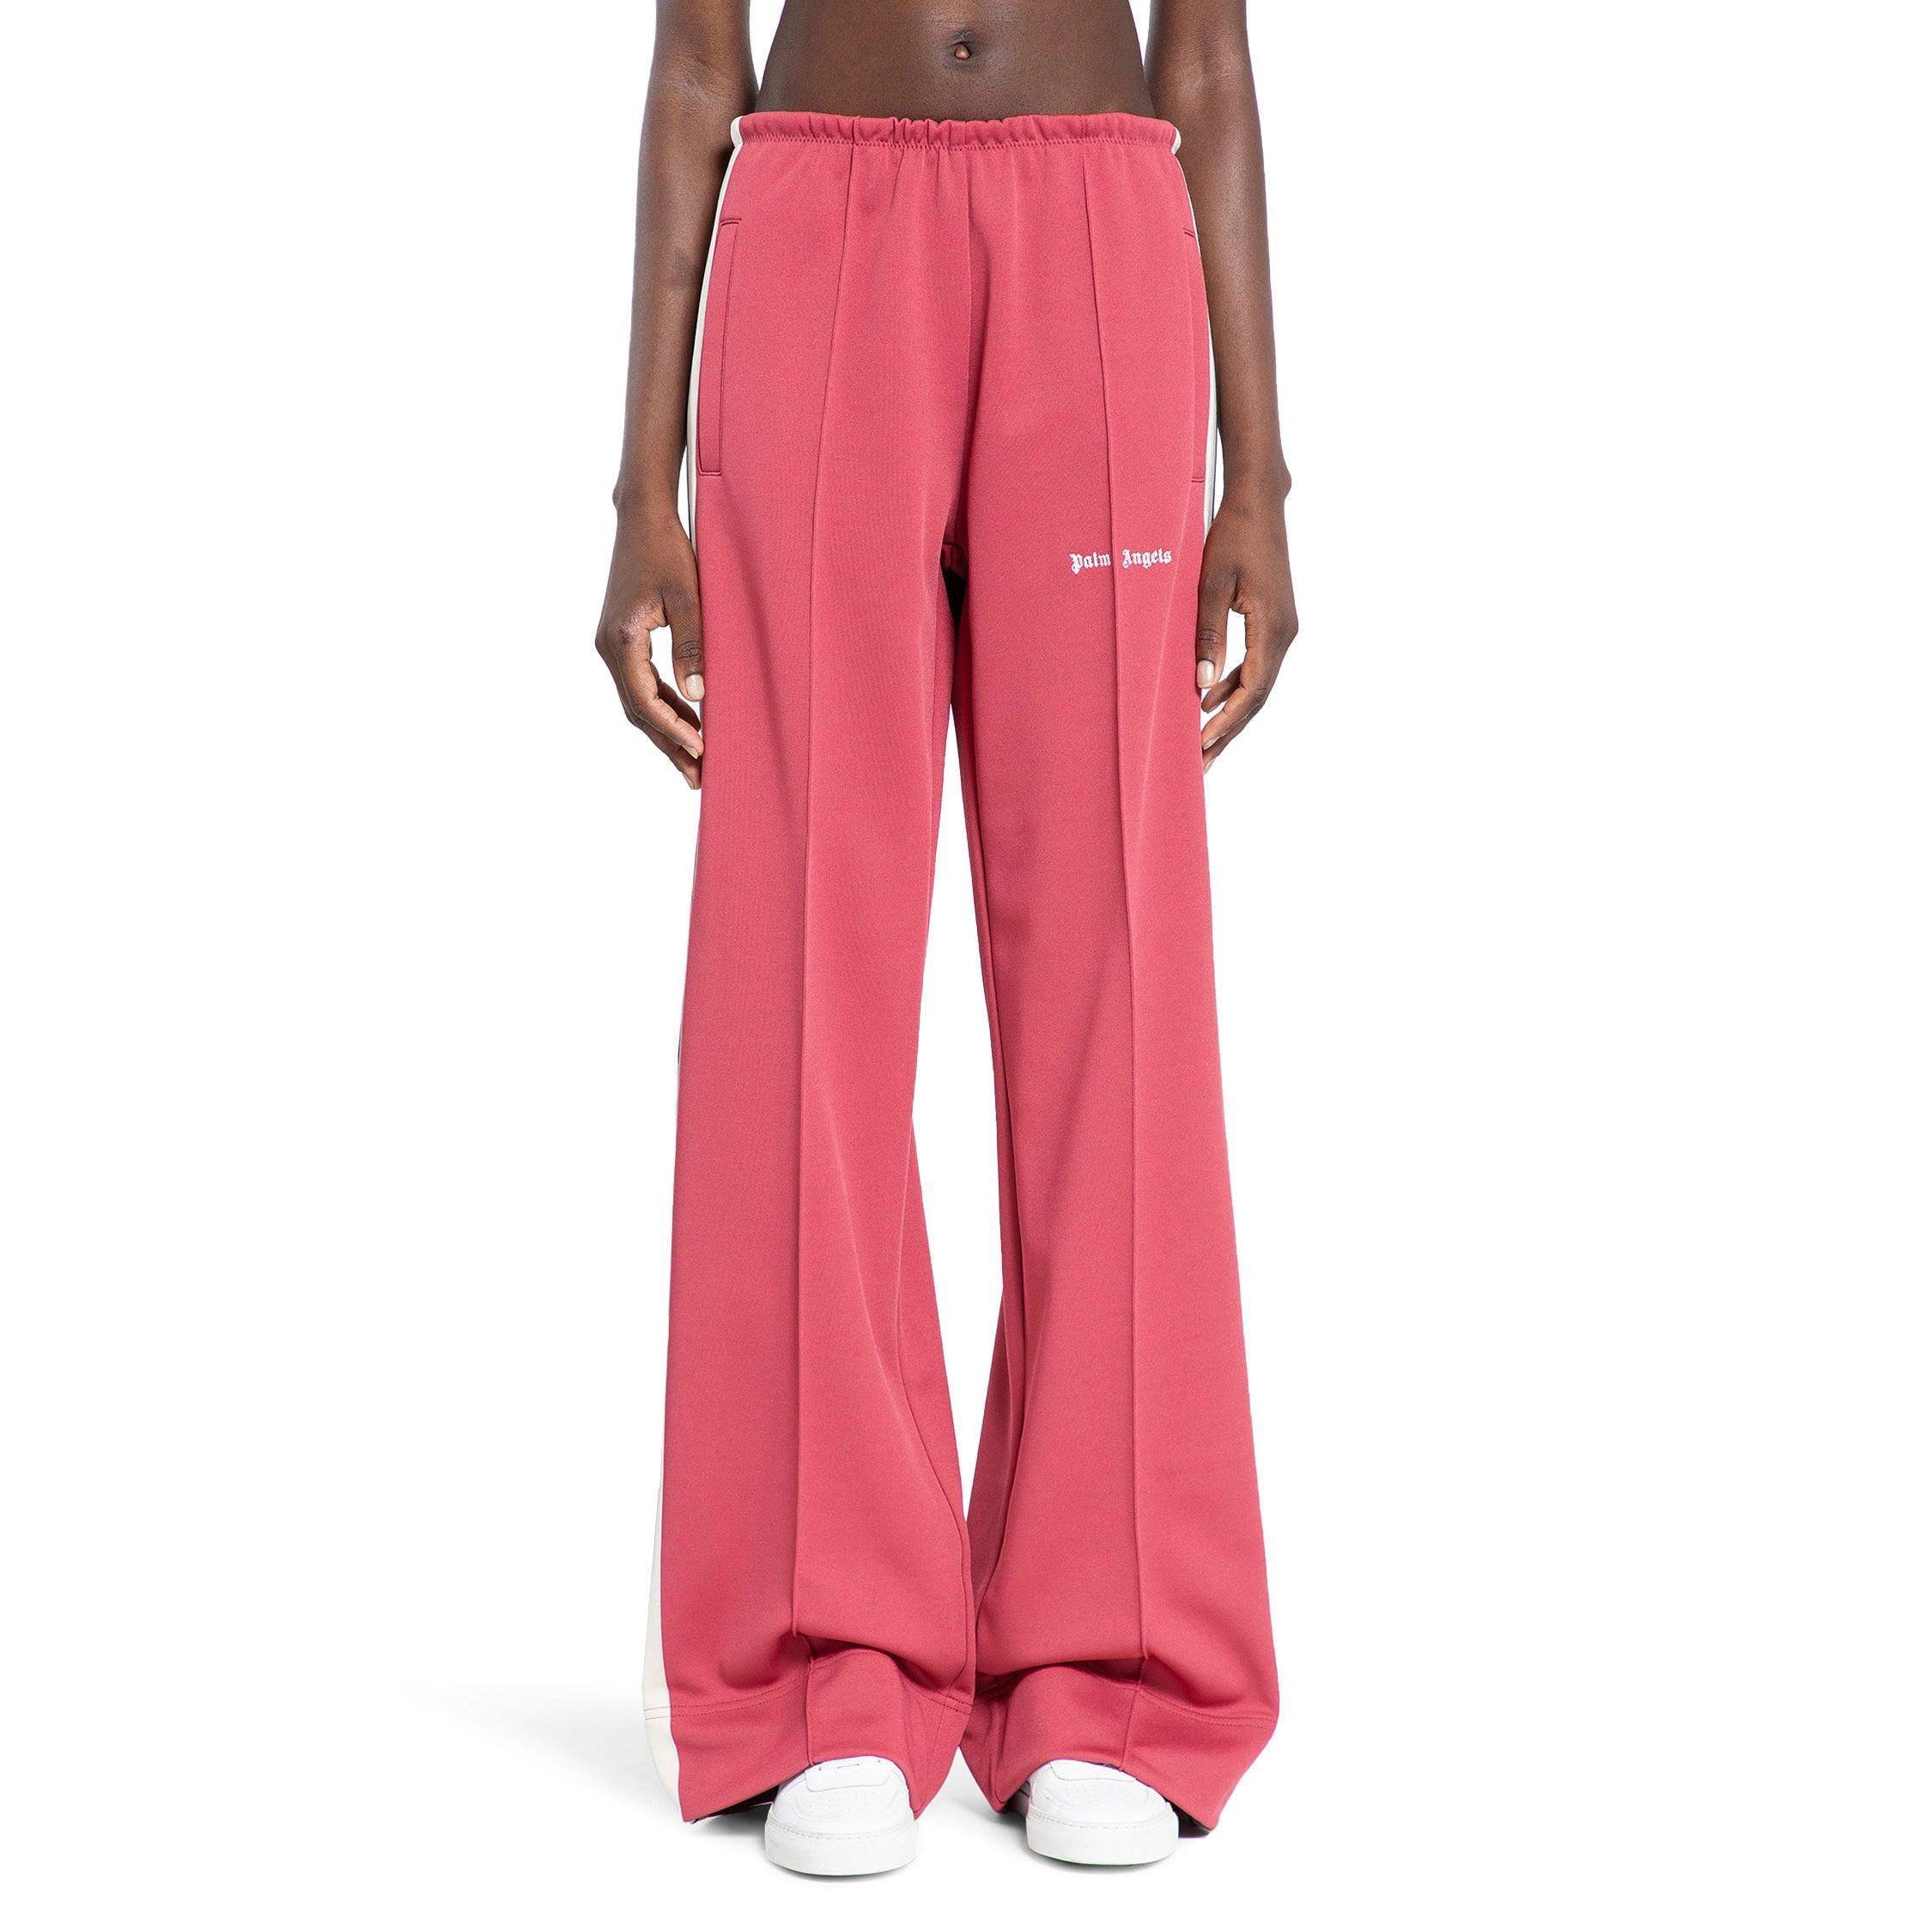 PALM ANGELS WOMAN RED TROUSERS by PALM ANGELS